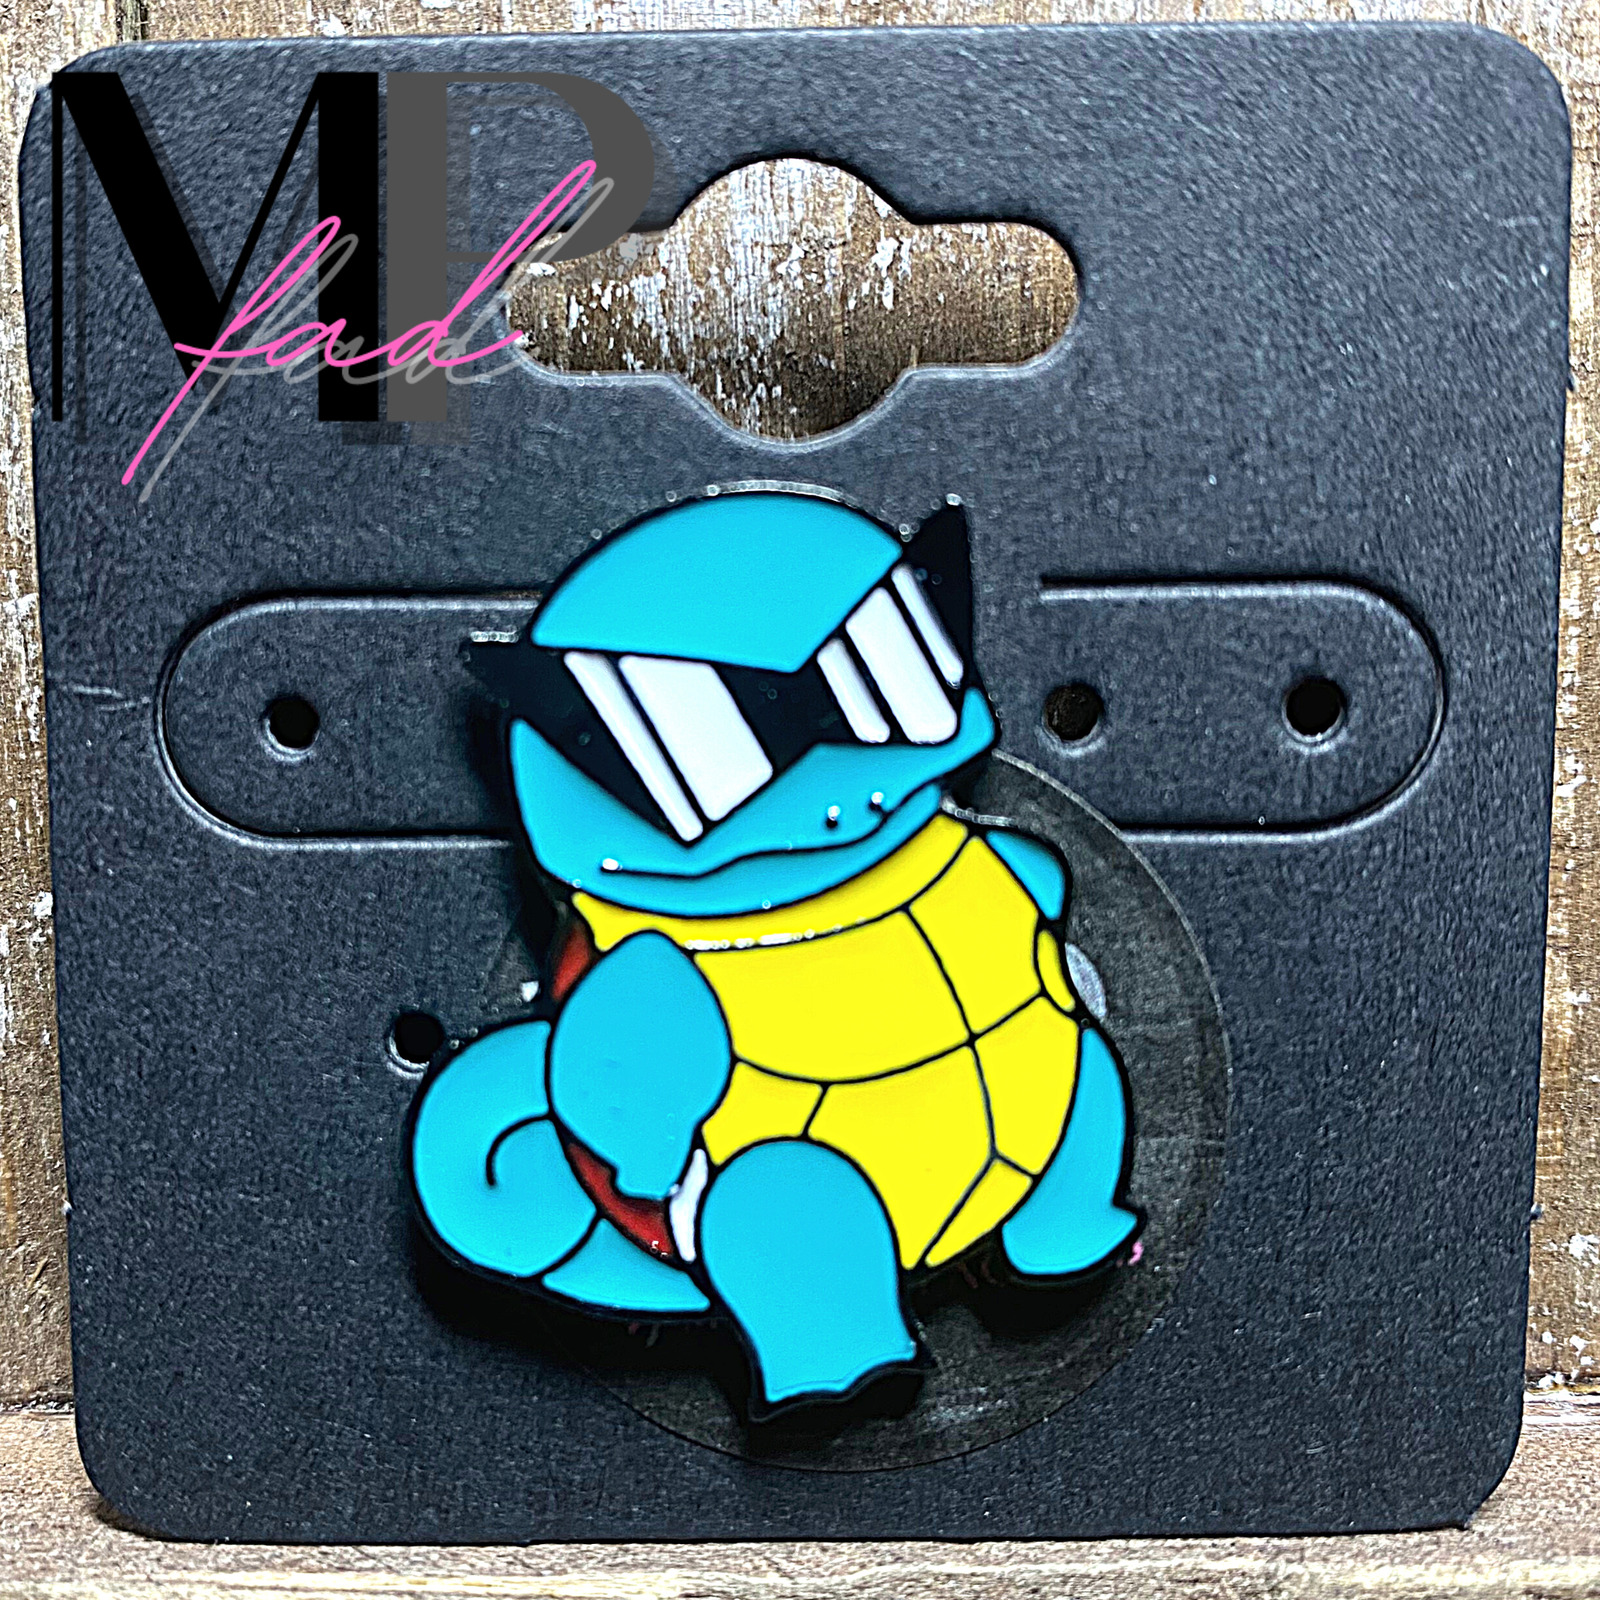 Pokemon Collectible Soft Enamel Pin Rubber Clutch COOL SQUIRTLE Squad SUNGLASSES